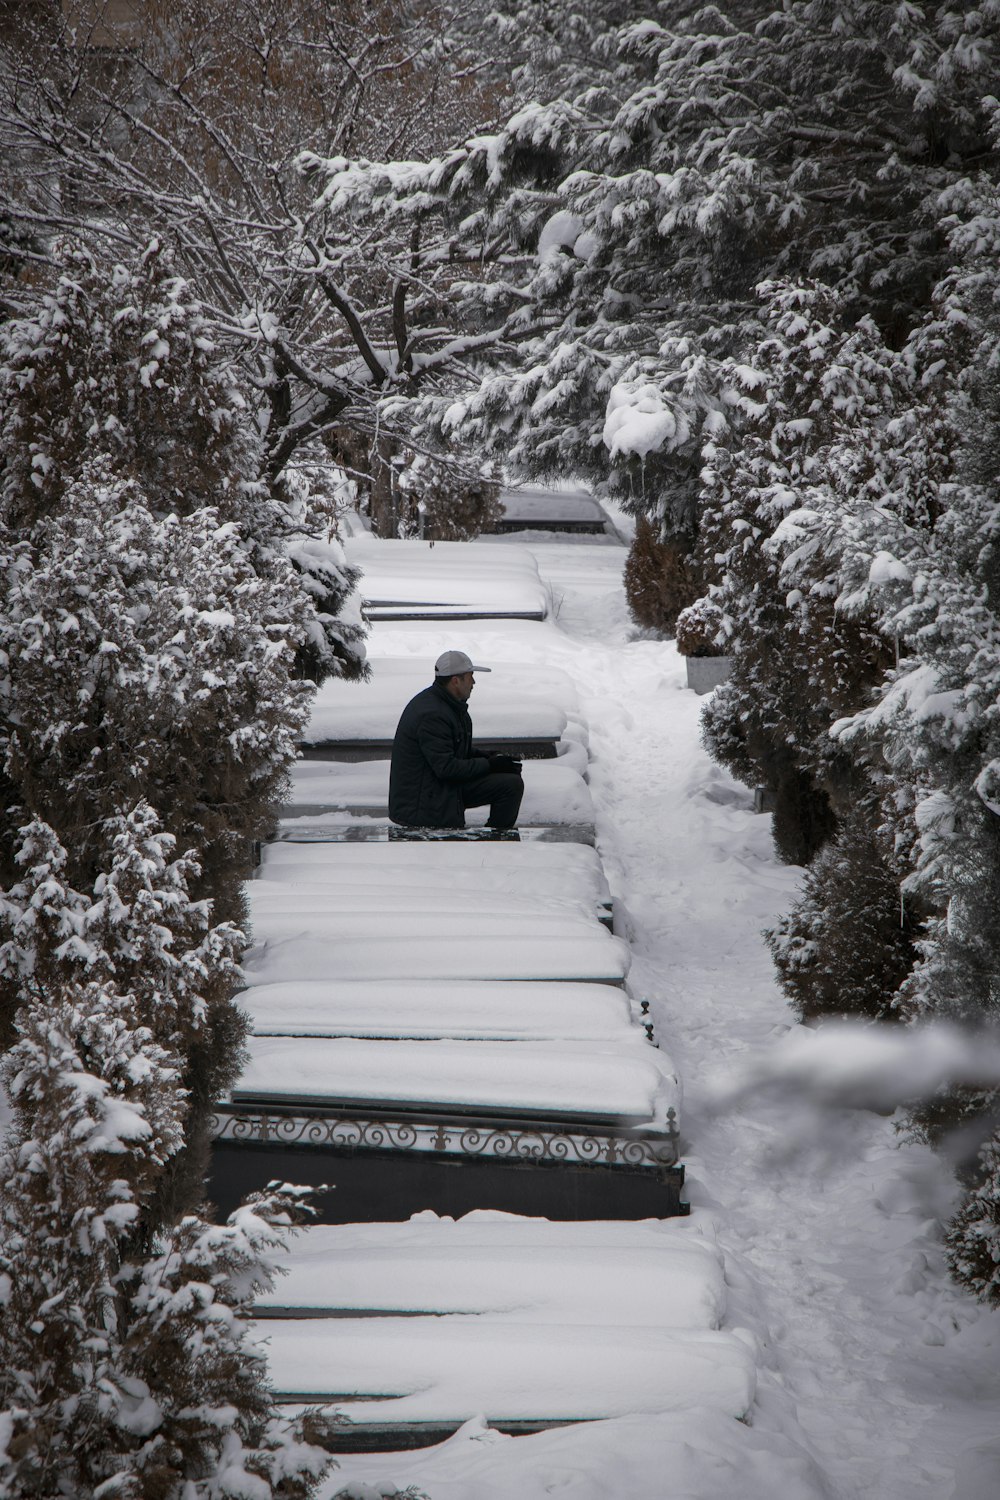 a person sitting on a bench in the snow